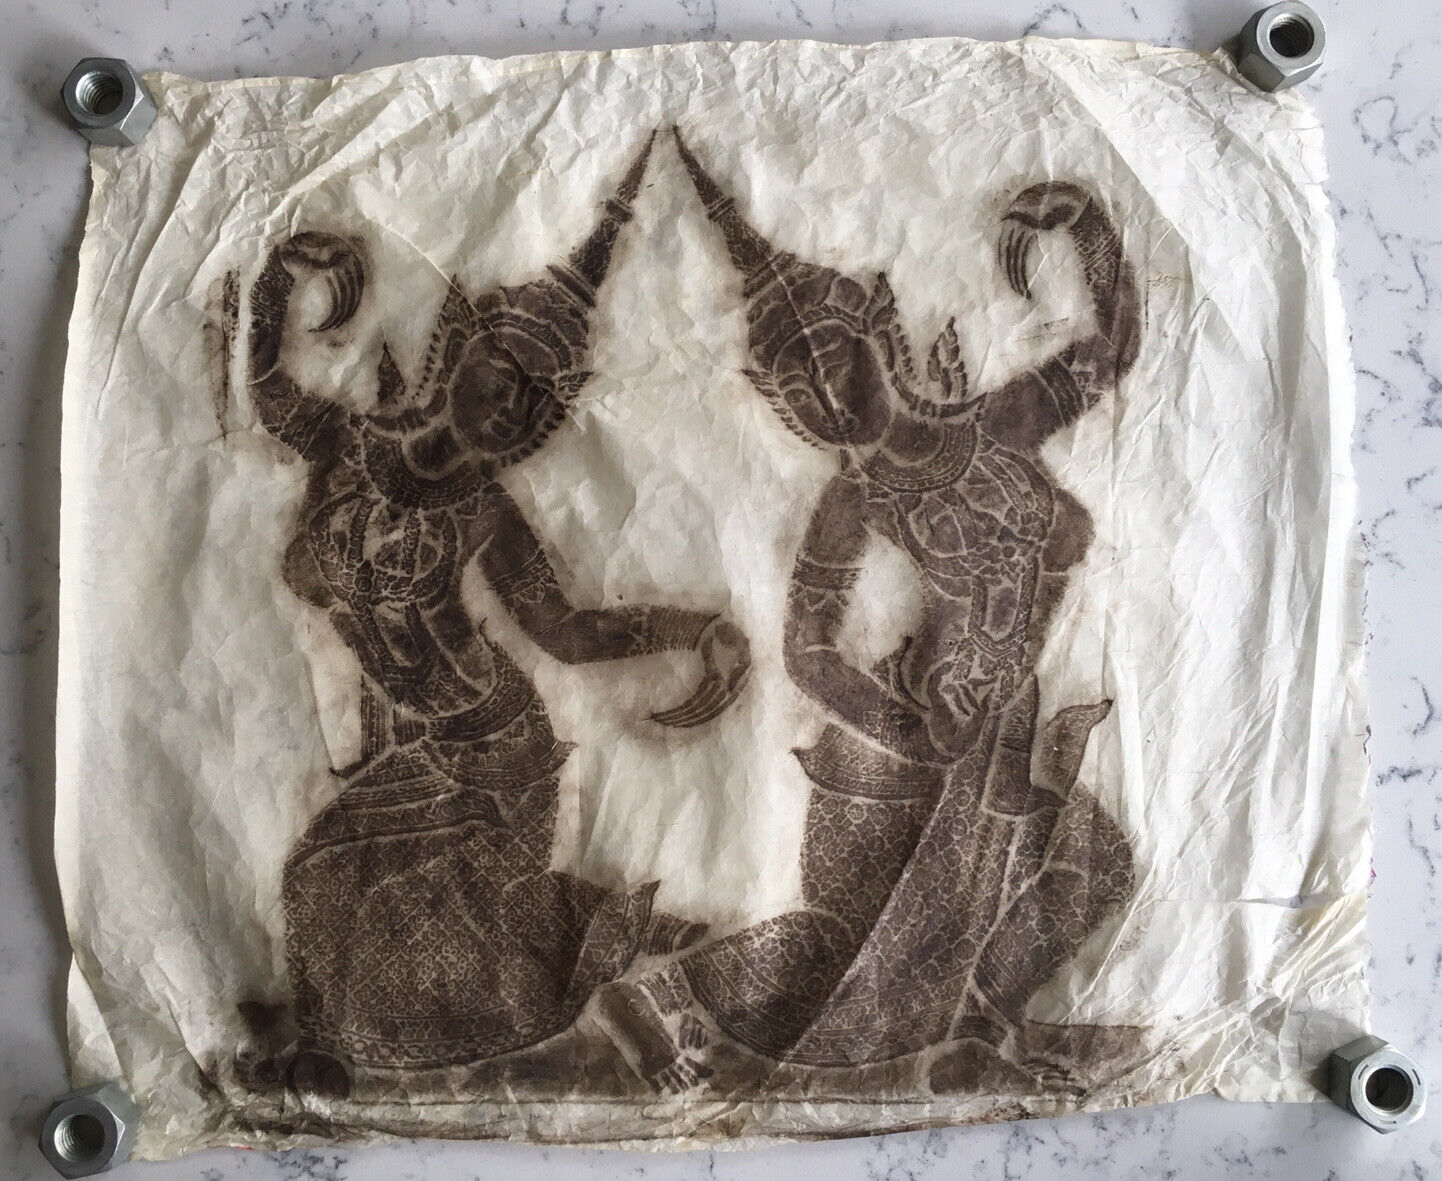 THAI BUDHIST TEMPLE RUBBING ON RICE PAPER BROWN FIGURES DANCING